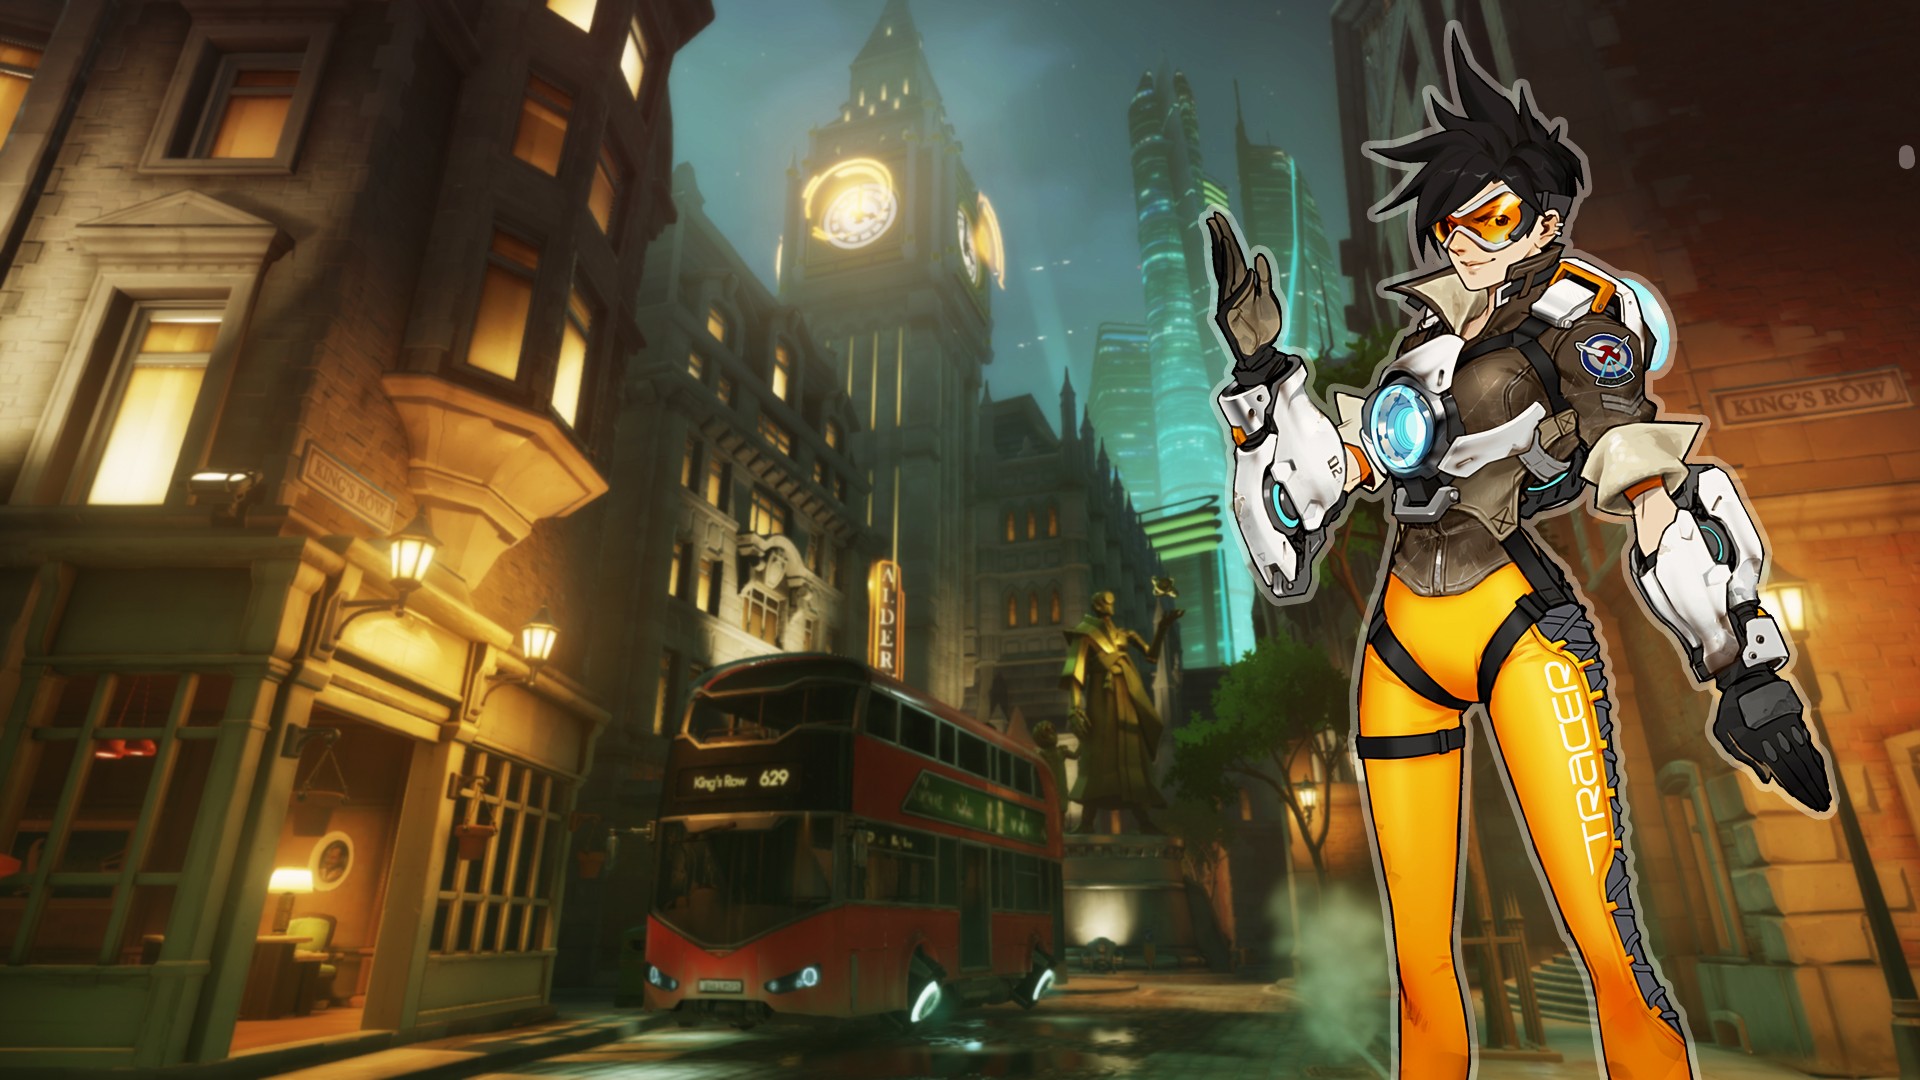 Overwatch Blizzard Entertainment Video Games Livewirehd Author Tracer Overwatch Lena Oxton 1920x1080